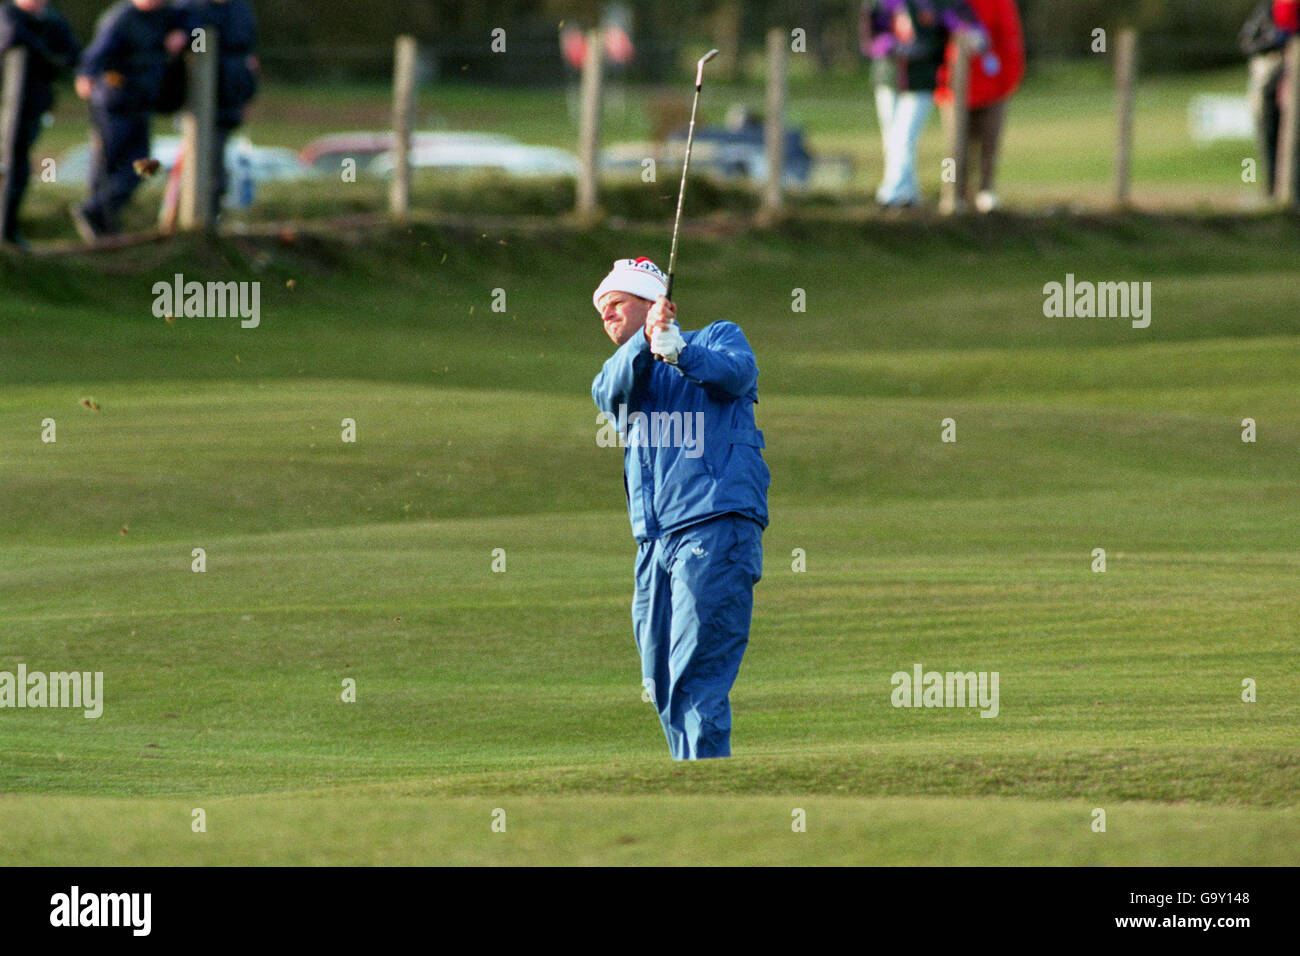 GOLF DUNHILL CUP. SANDY LYLE ,SCOTLAND ON THE 17th FAIRWAY Stock Photo